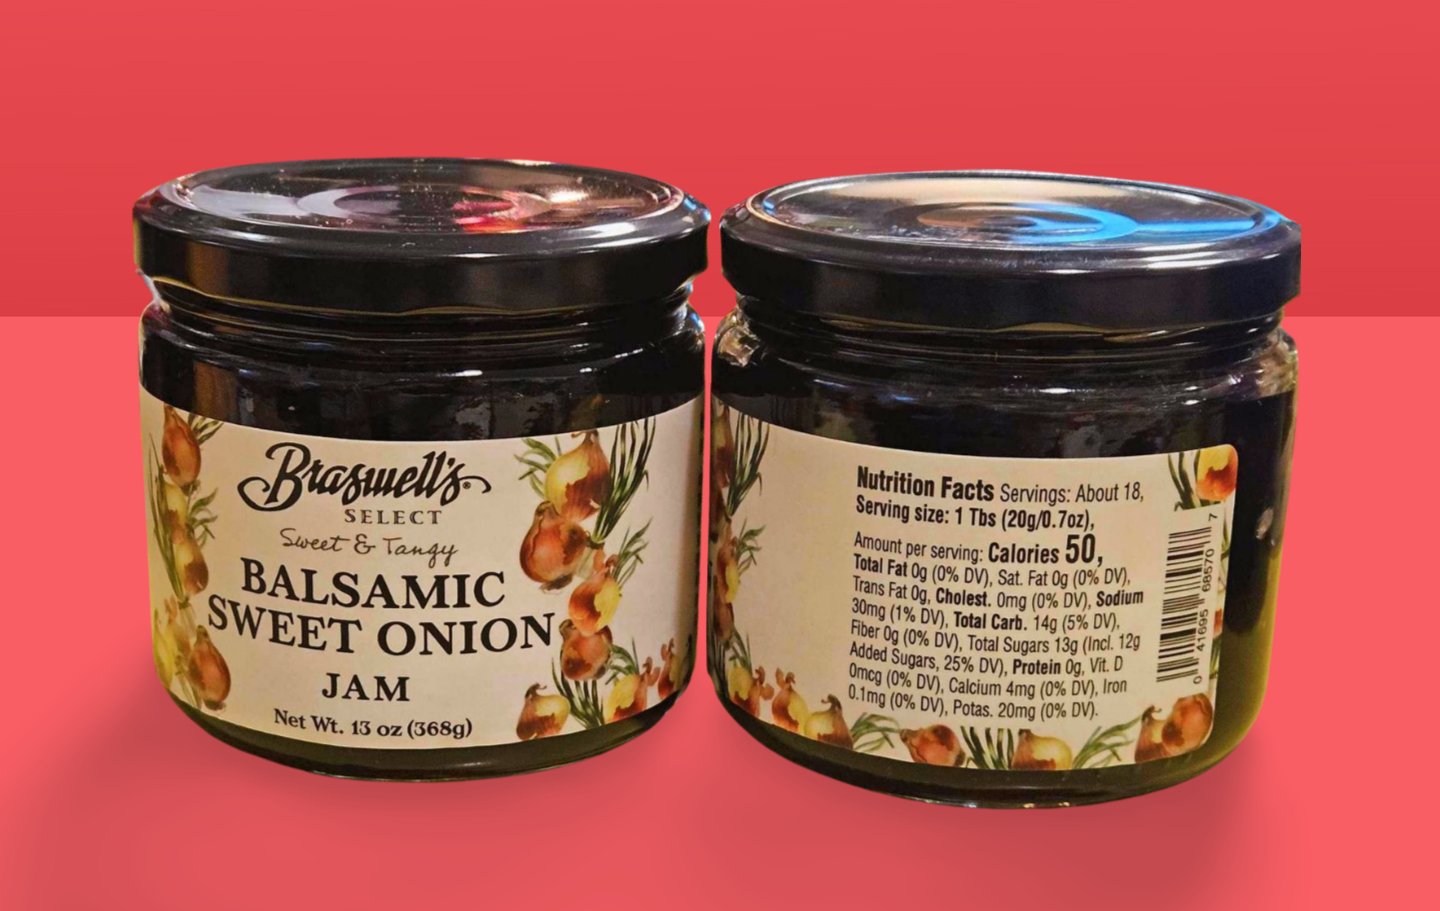 Braswell's Select Balsamic Sweet Onion Jam 13 OZ - Dusty's Country Store